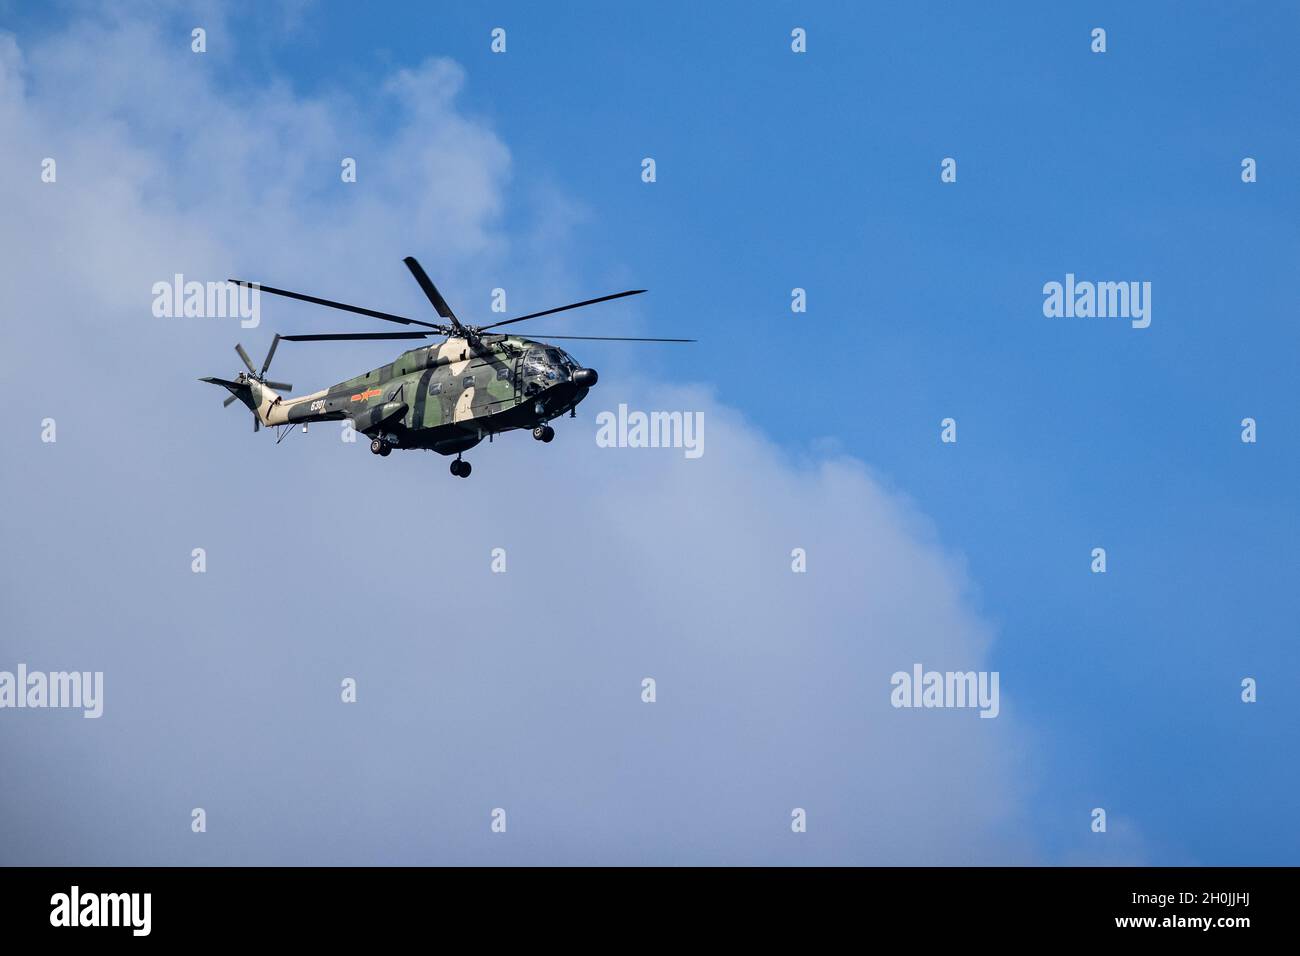 HONG KONG, CHINA - August 07, 2020: People's Liberation Army helicopters patrol over the sky of Hong Kong Stock Photo